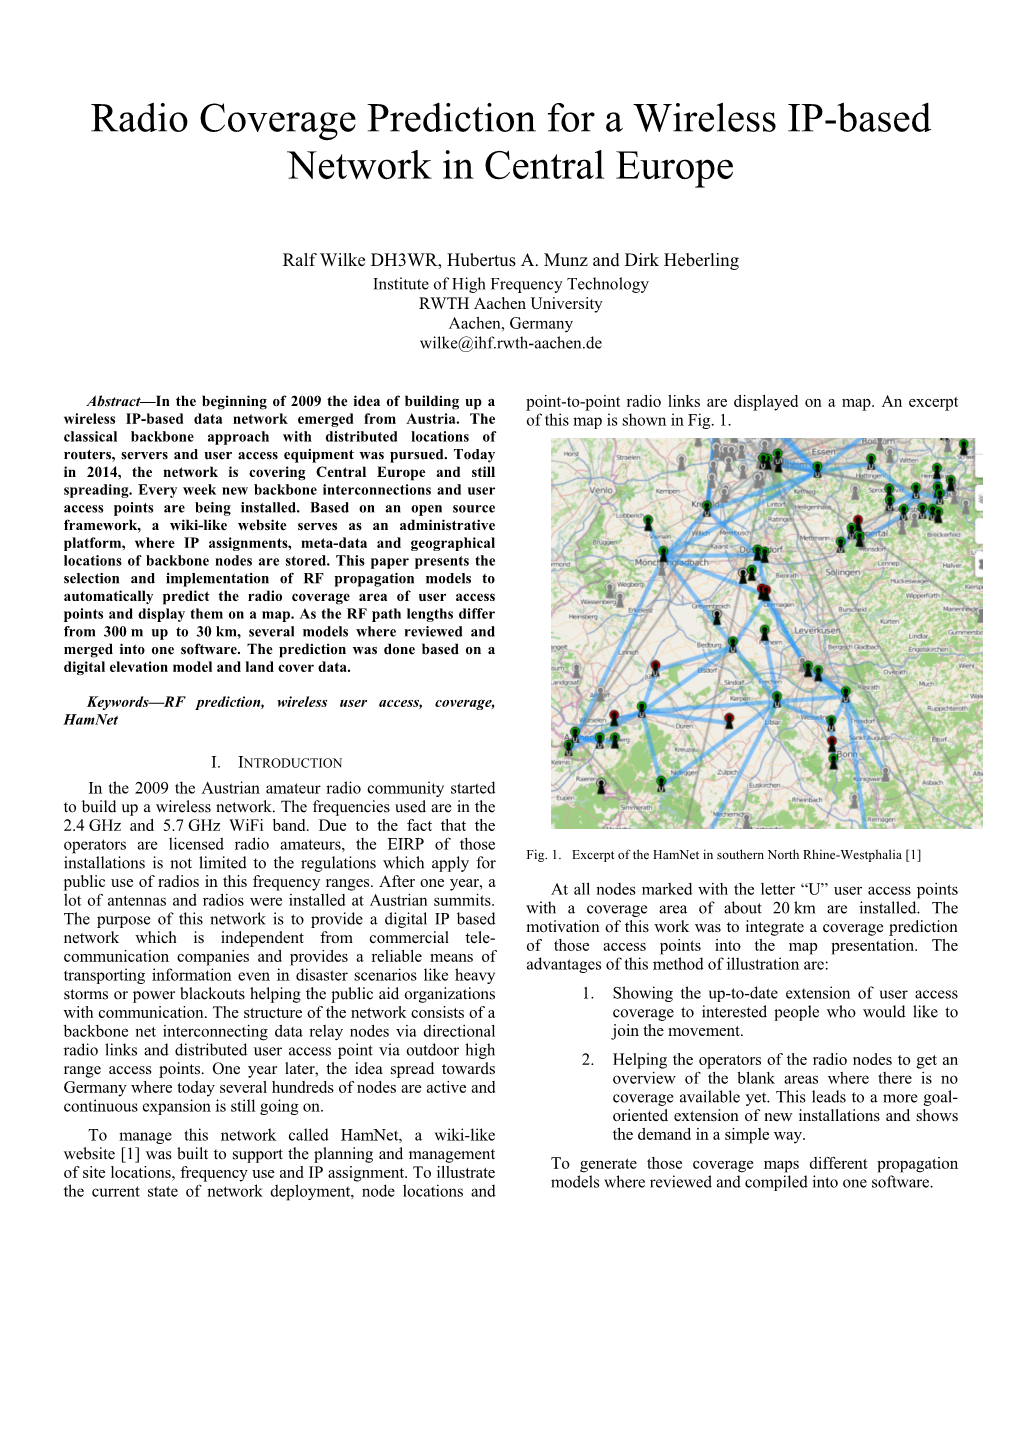 Radio Coverage Prediction for a Wireless IP-Based Network in Central Europe